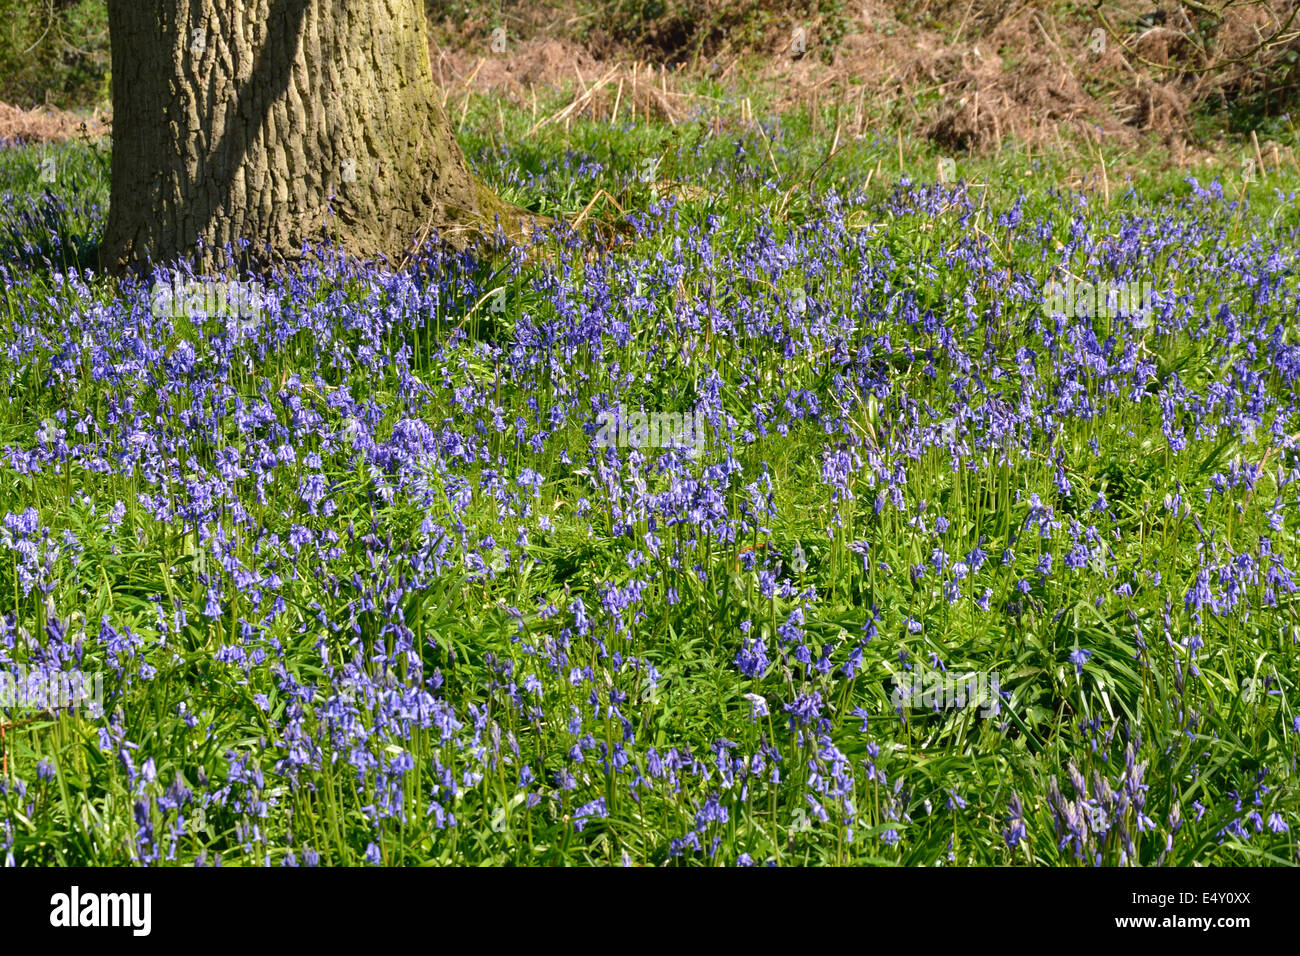 Field of Bluebells with tree trunk Stock Photo